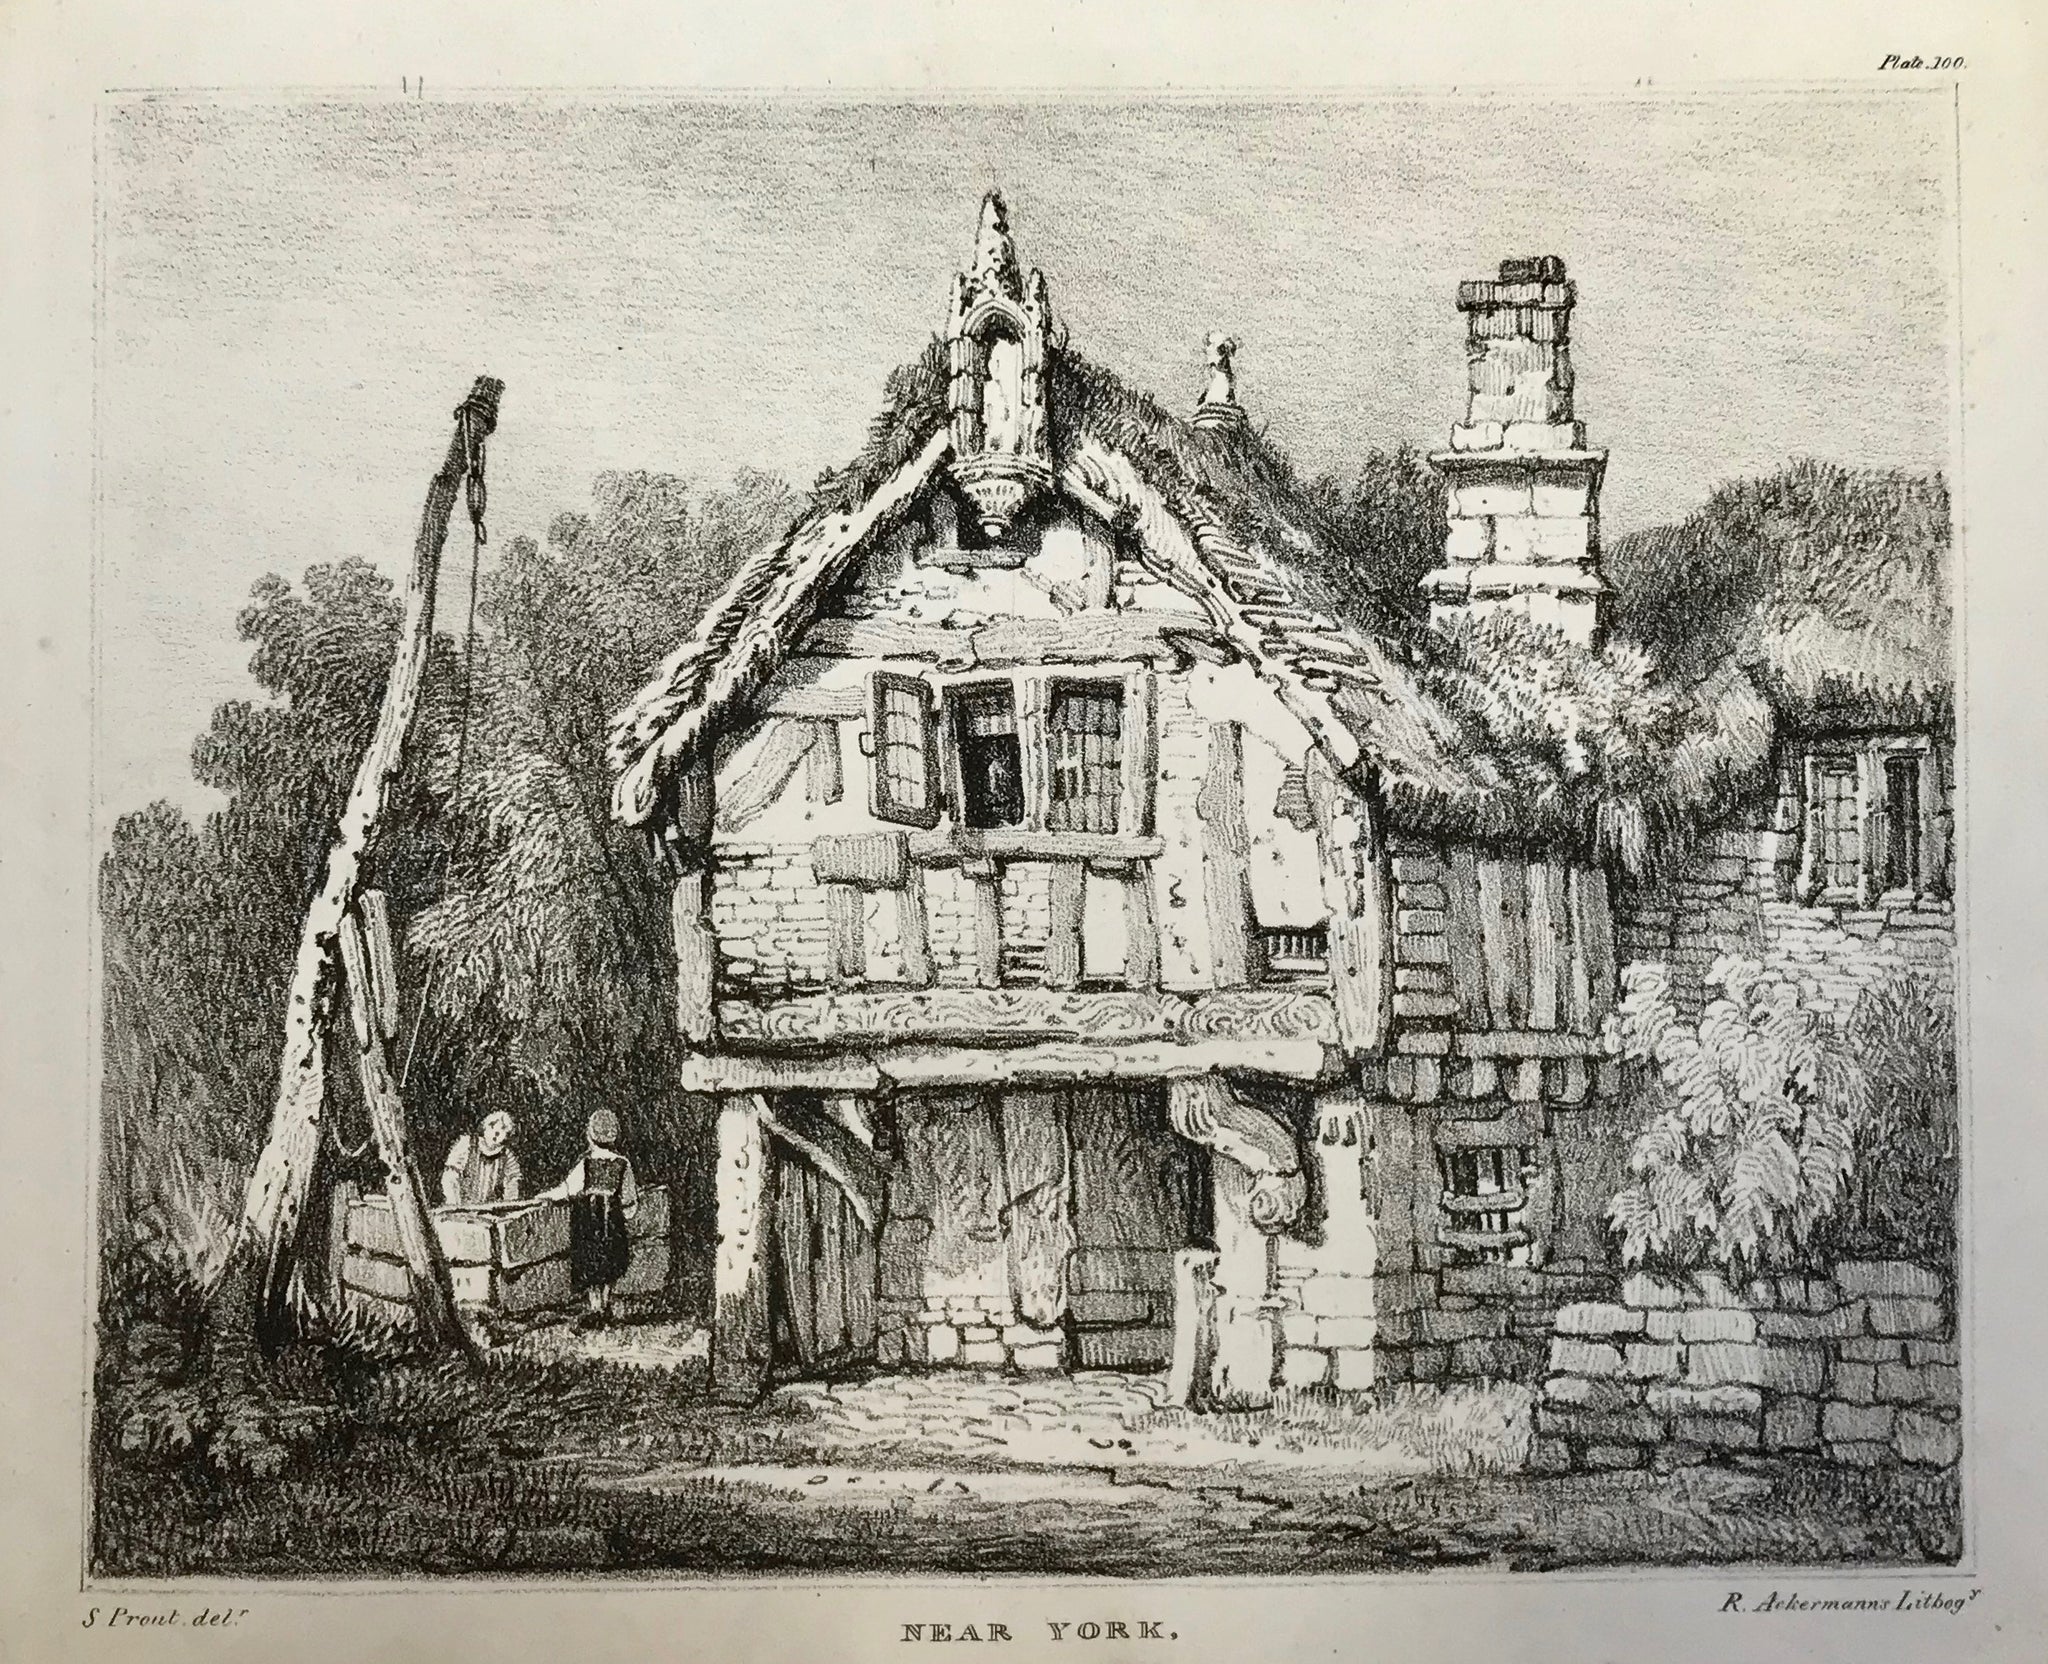 "Near York"  Lithograph by R. Ackermanns after S. Prout 1820. Minor crease in lower left margin corner.